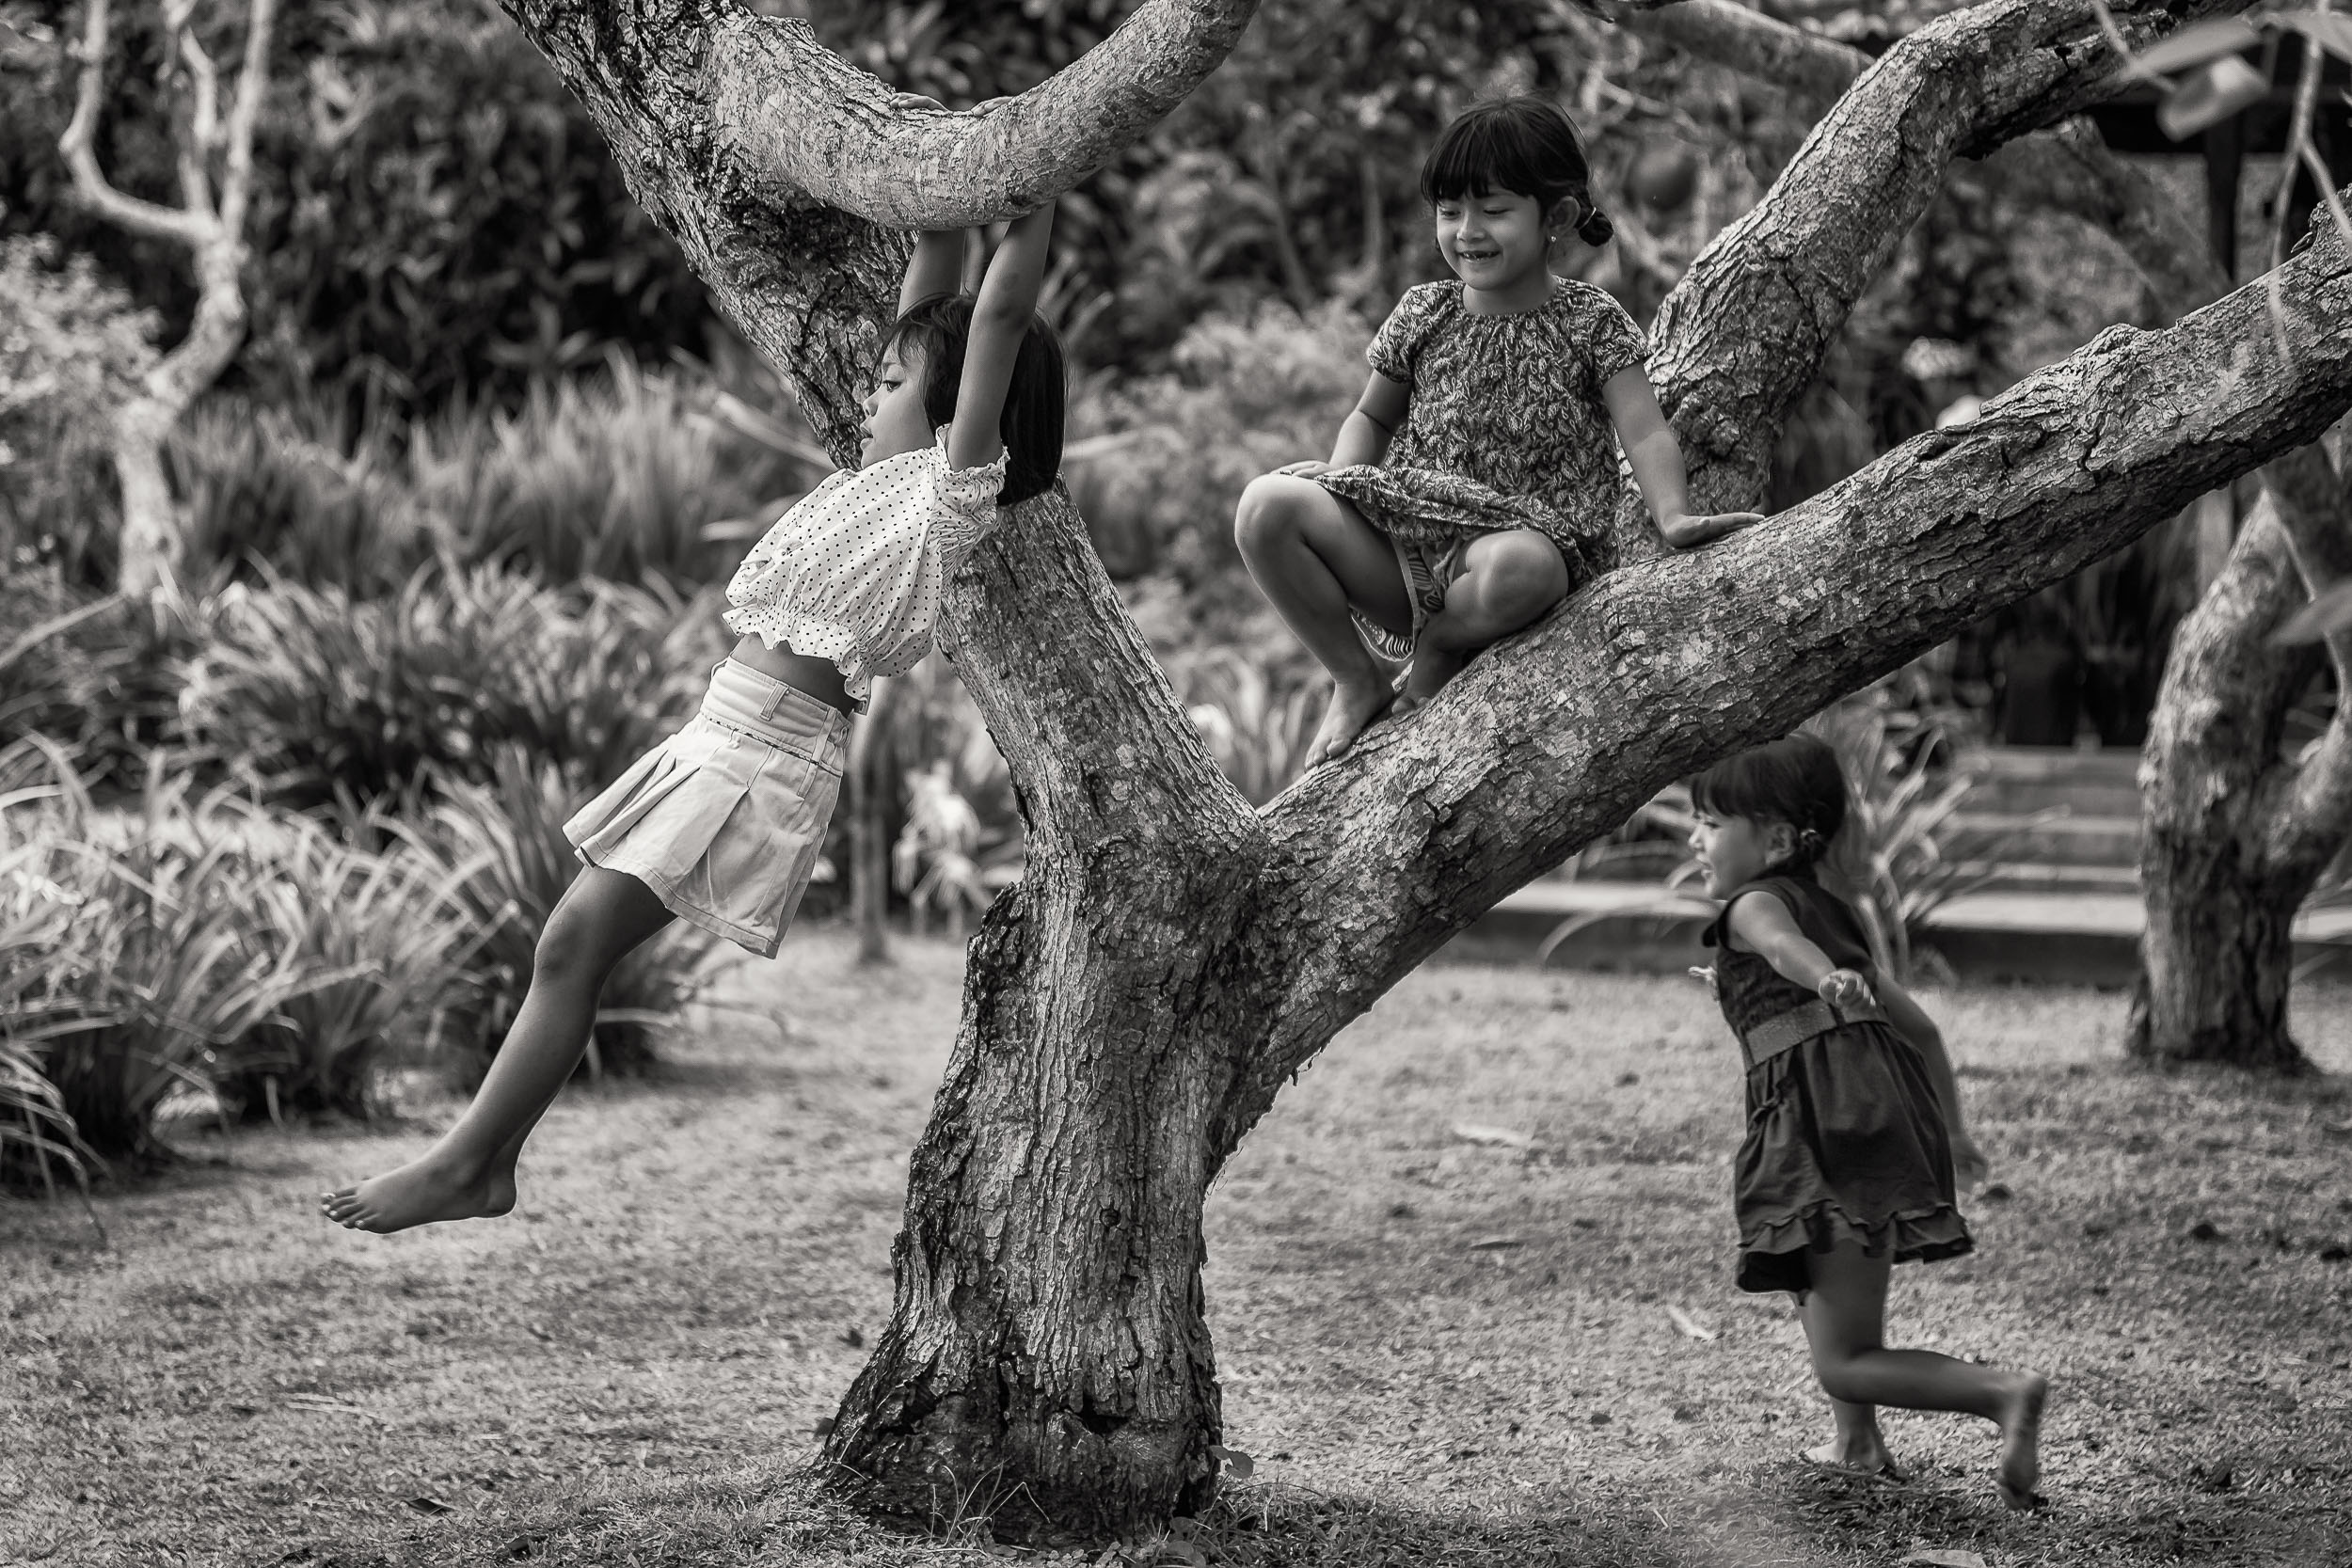 Three young girls at play in the grounds of a Hindu Temple complex in Bali, Indonesia .